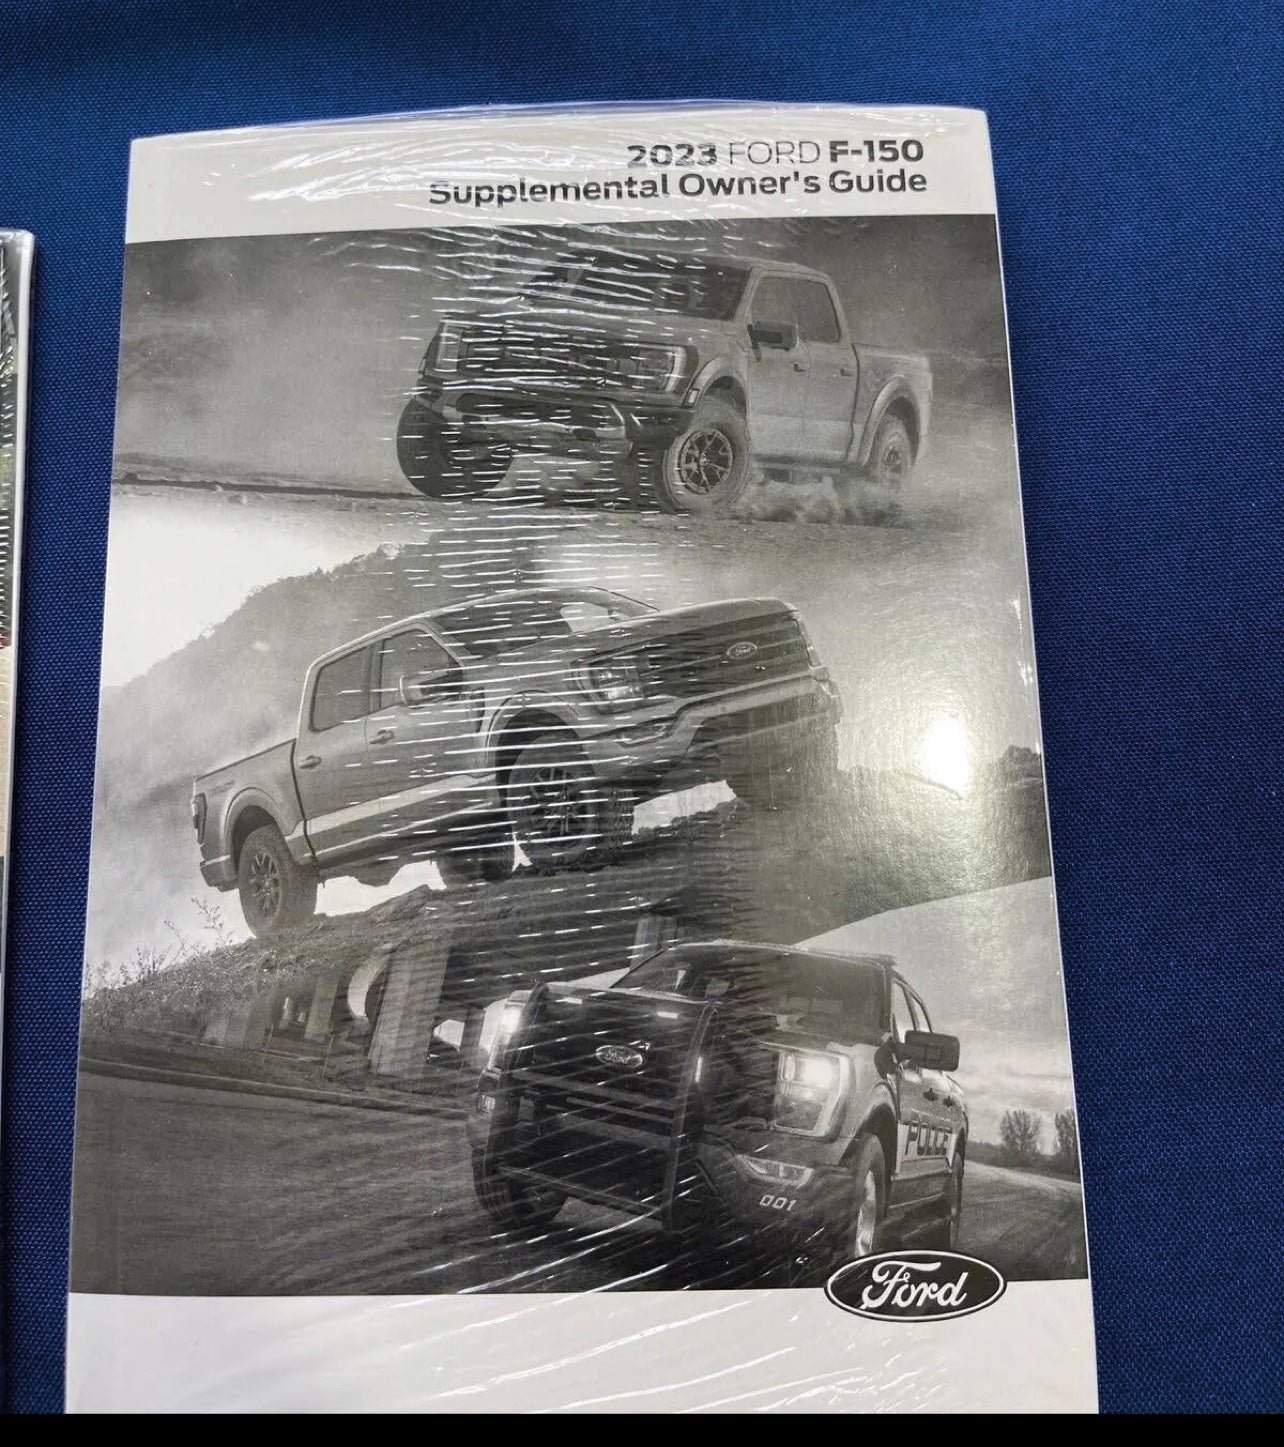 2023 Ford F-150 Supplement Owner’s Manual Cix78noPq